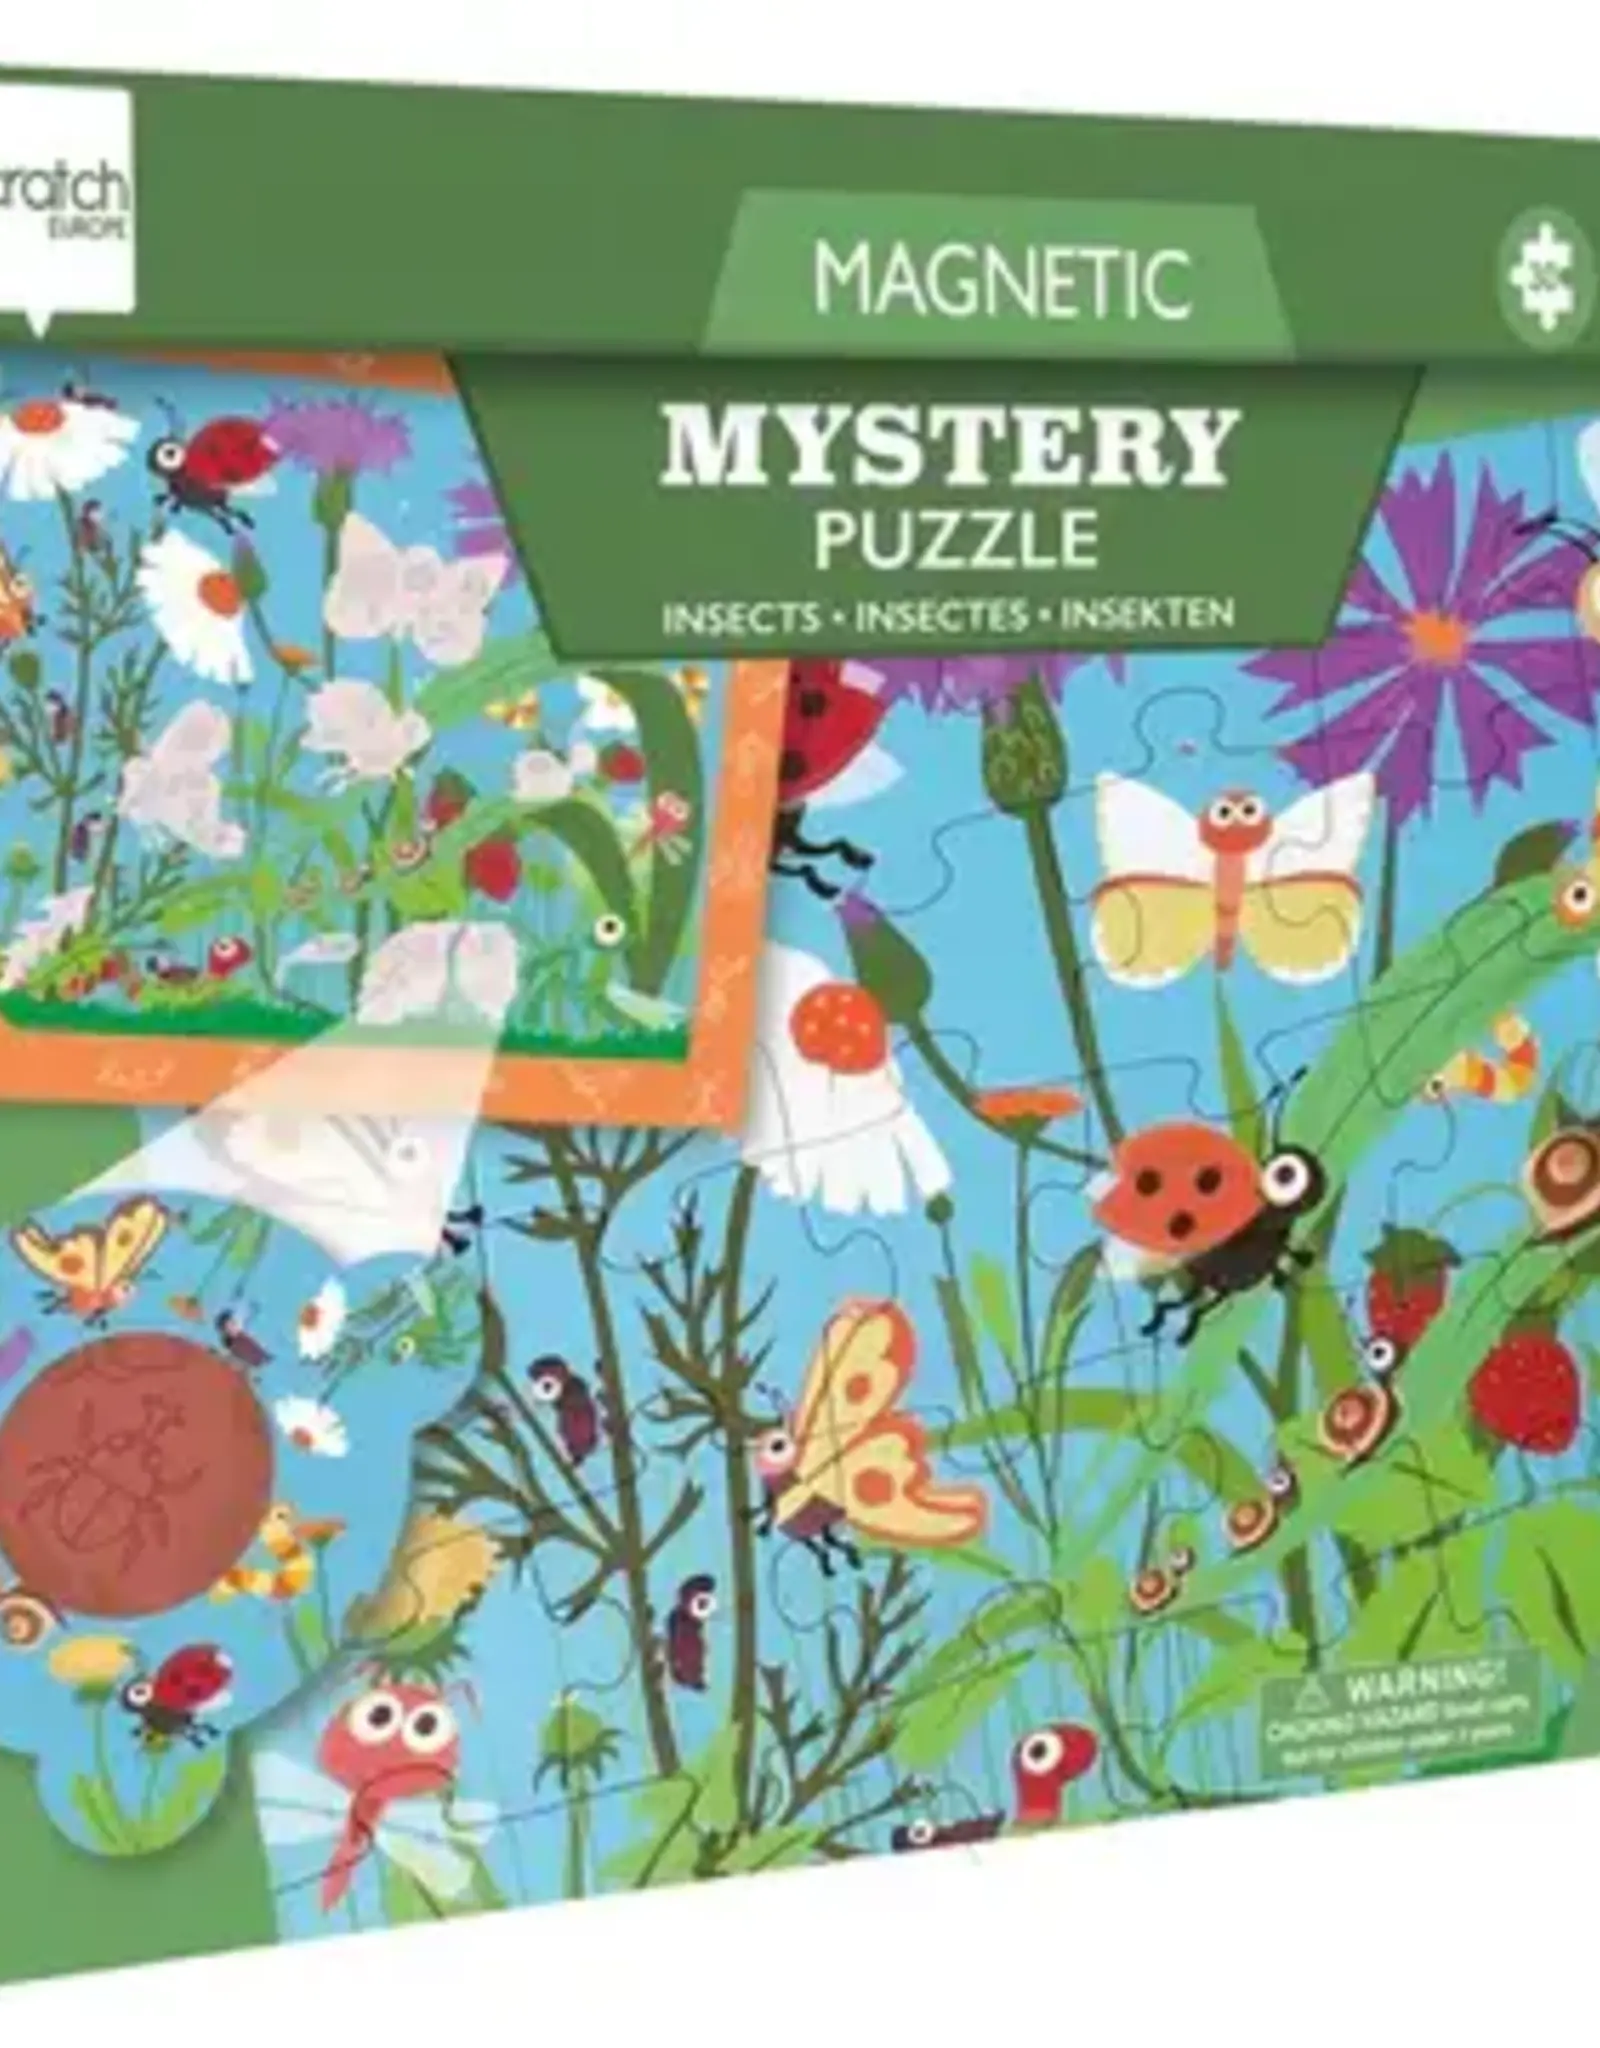 Dam Toys 30pc Magnetic Mystery Puzzle - Insect